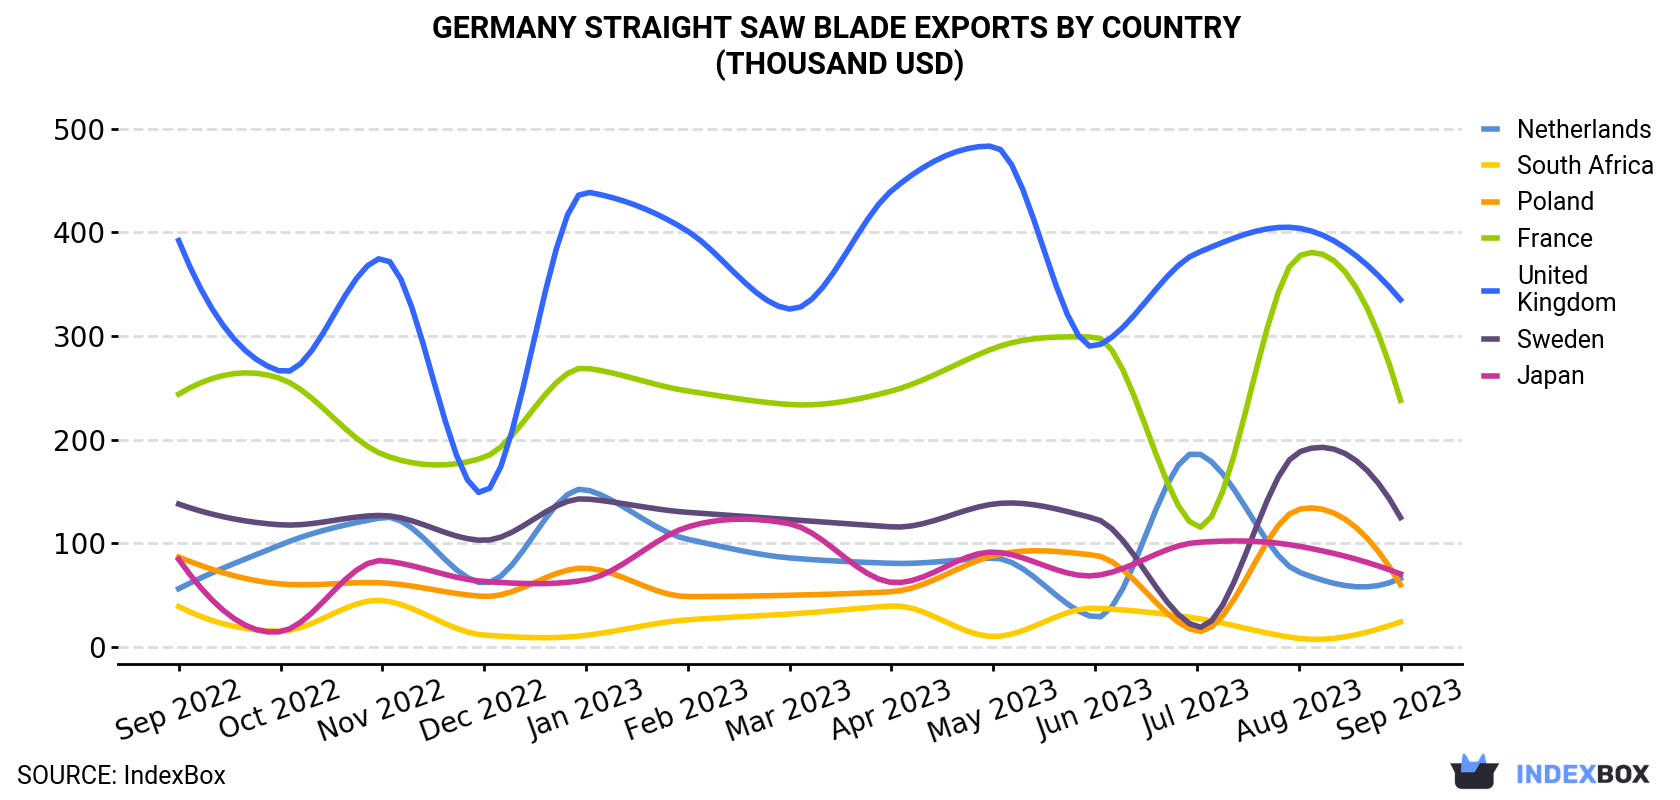 Germany Straight Saw Blade Exports By Country (Thousand USD)